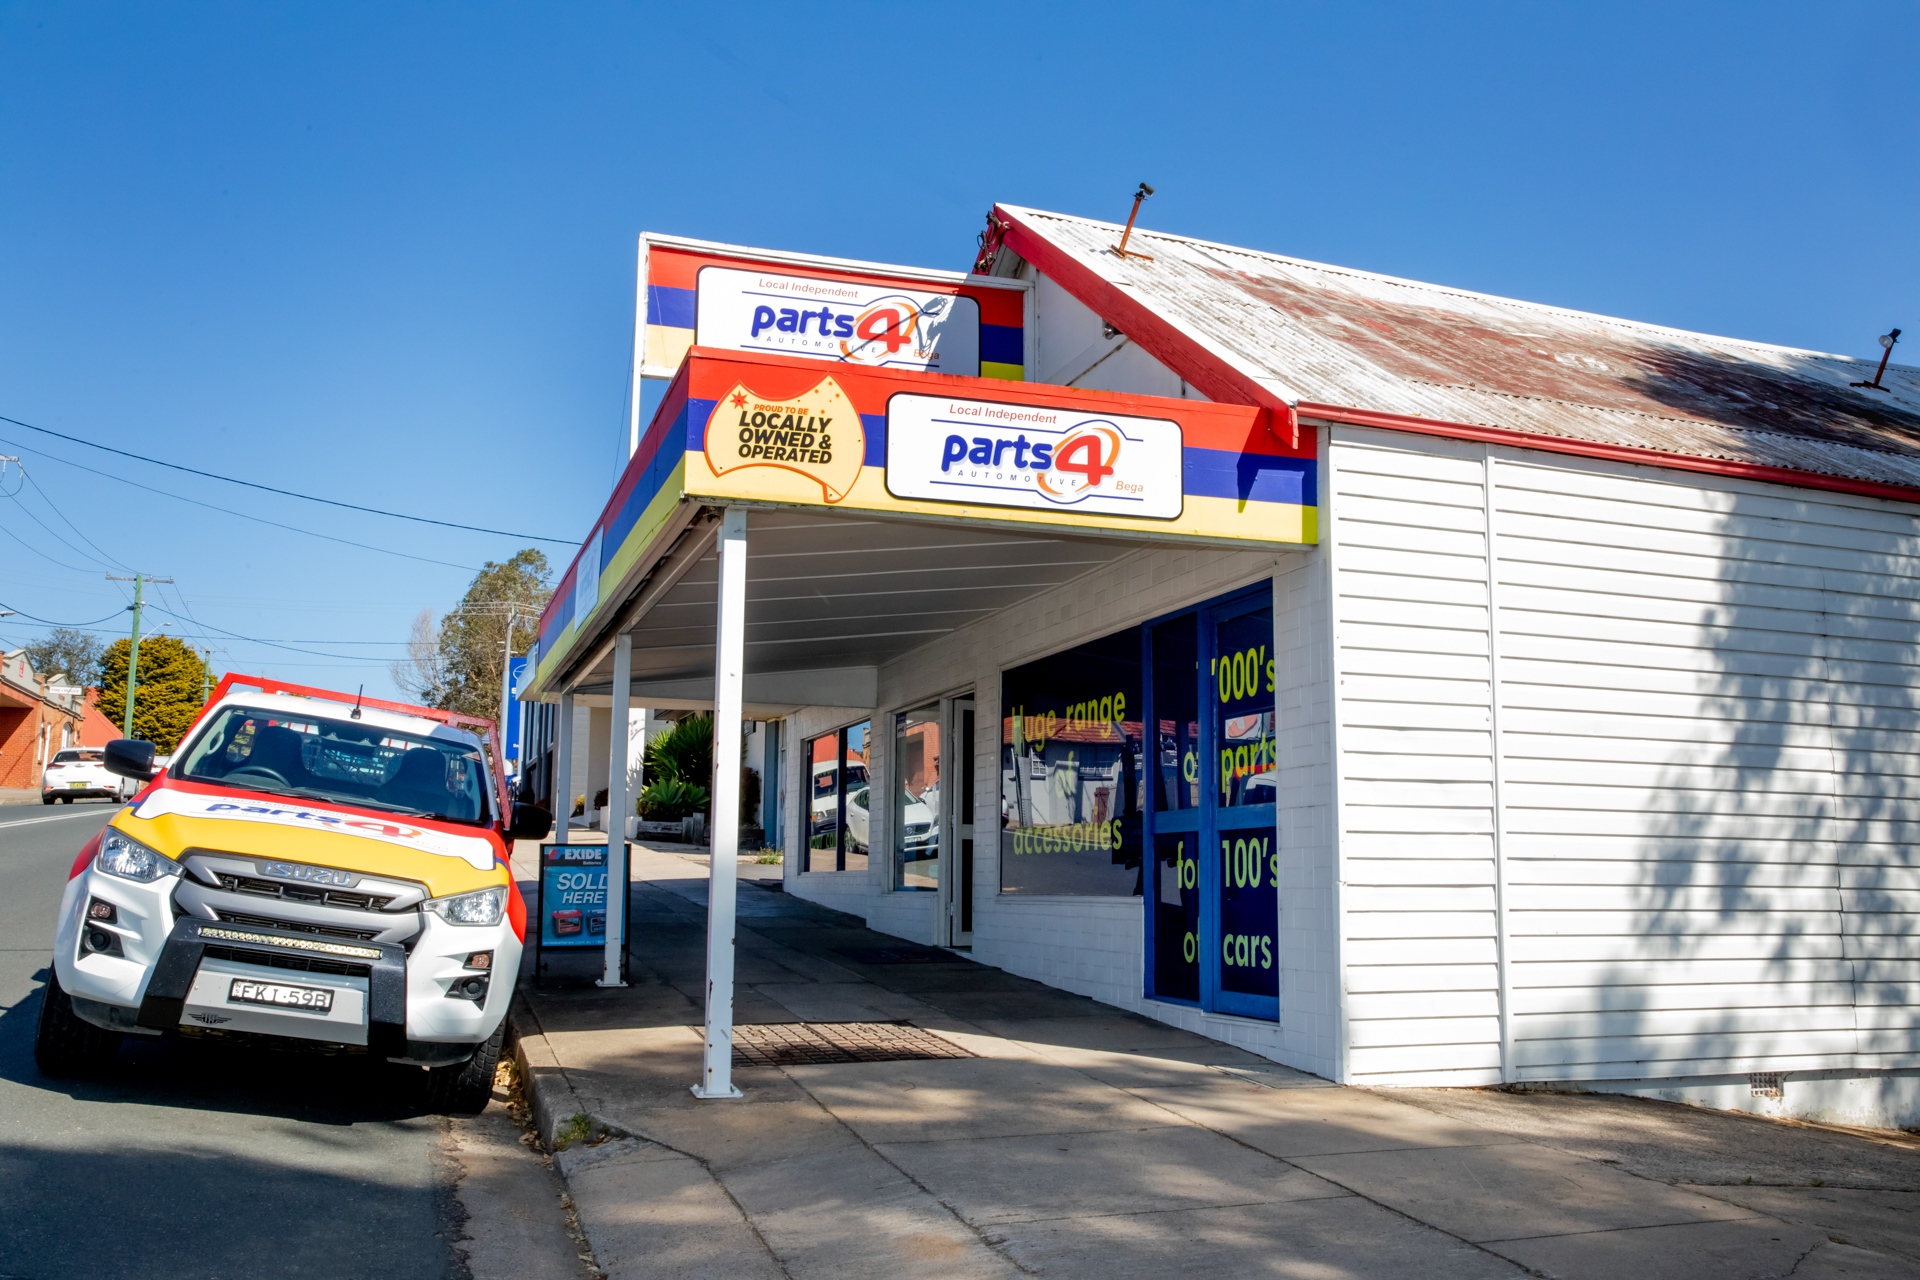 Local auto store guide car issues - Parts4 bega